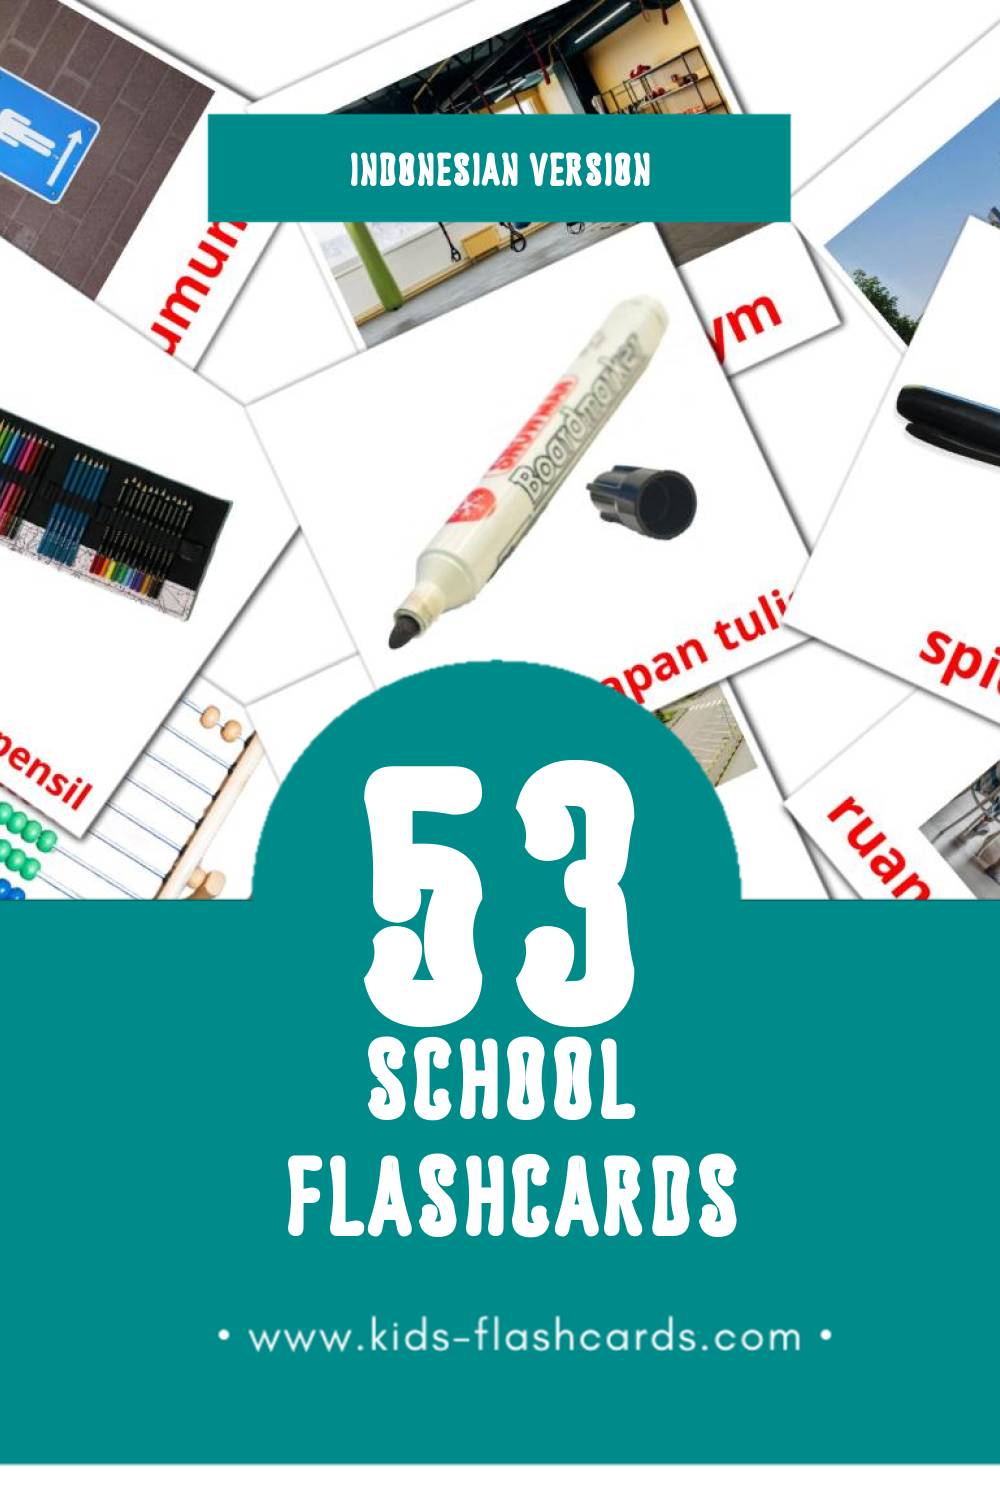 Visual Sekolah Flashcards for Toddlers (53 cards in Indonesian)